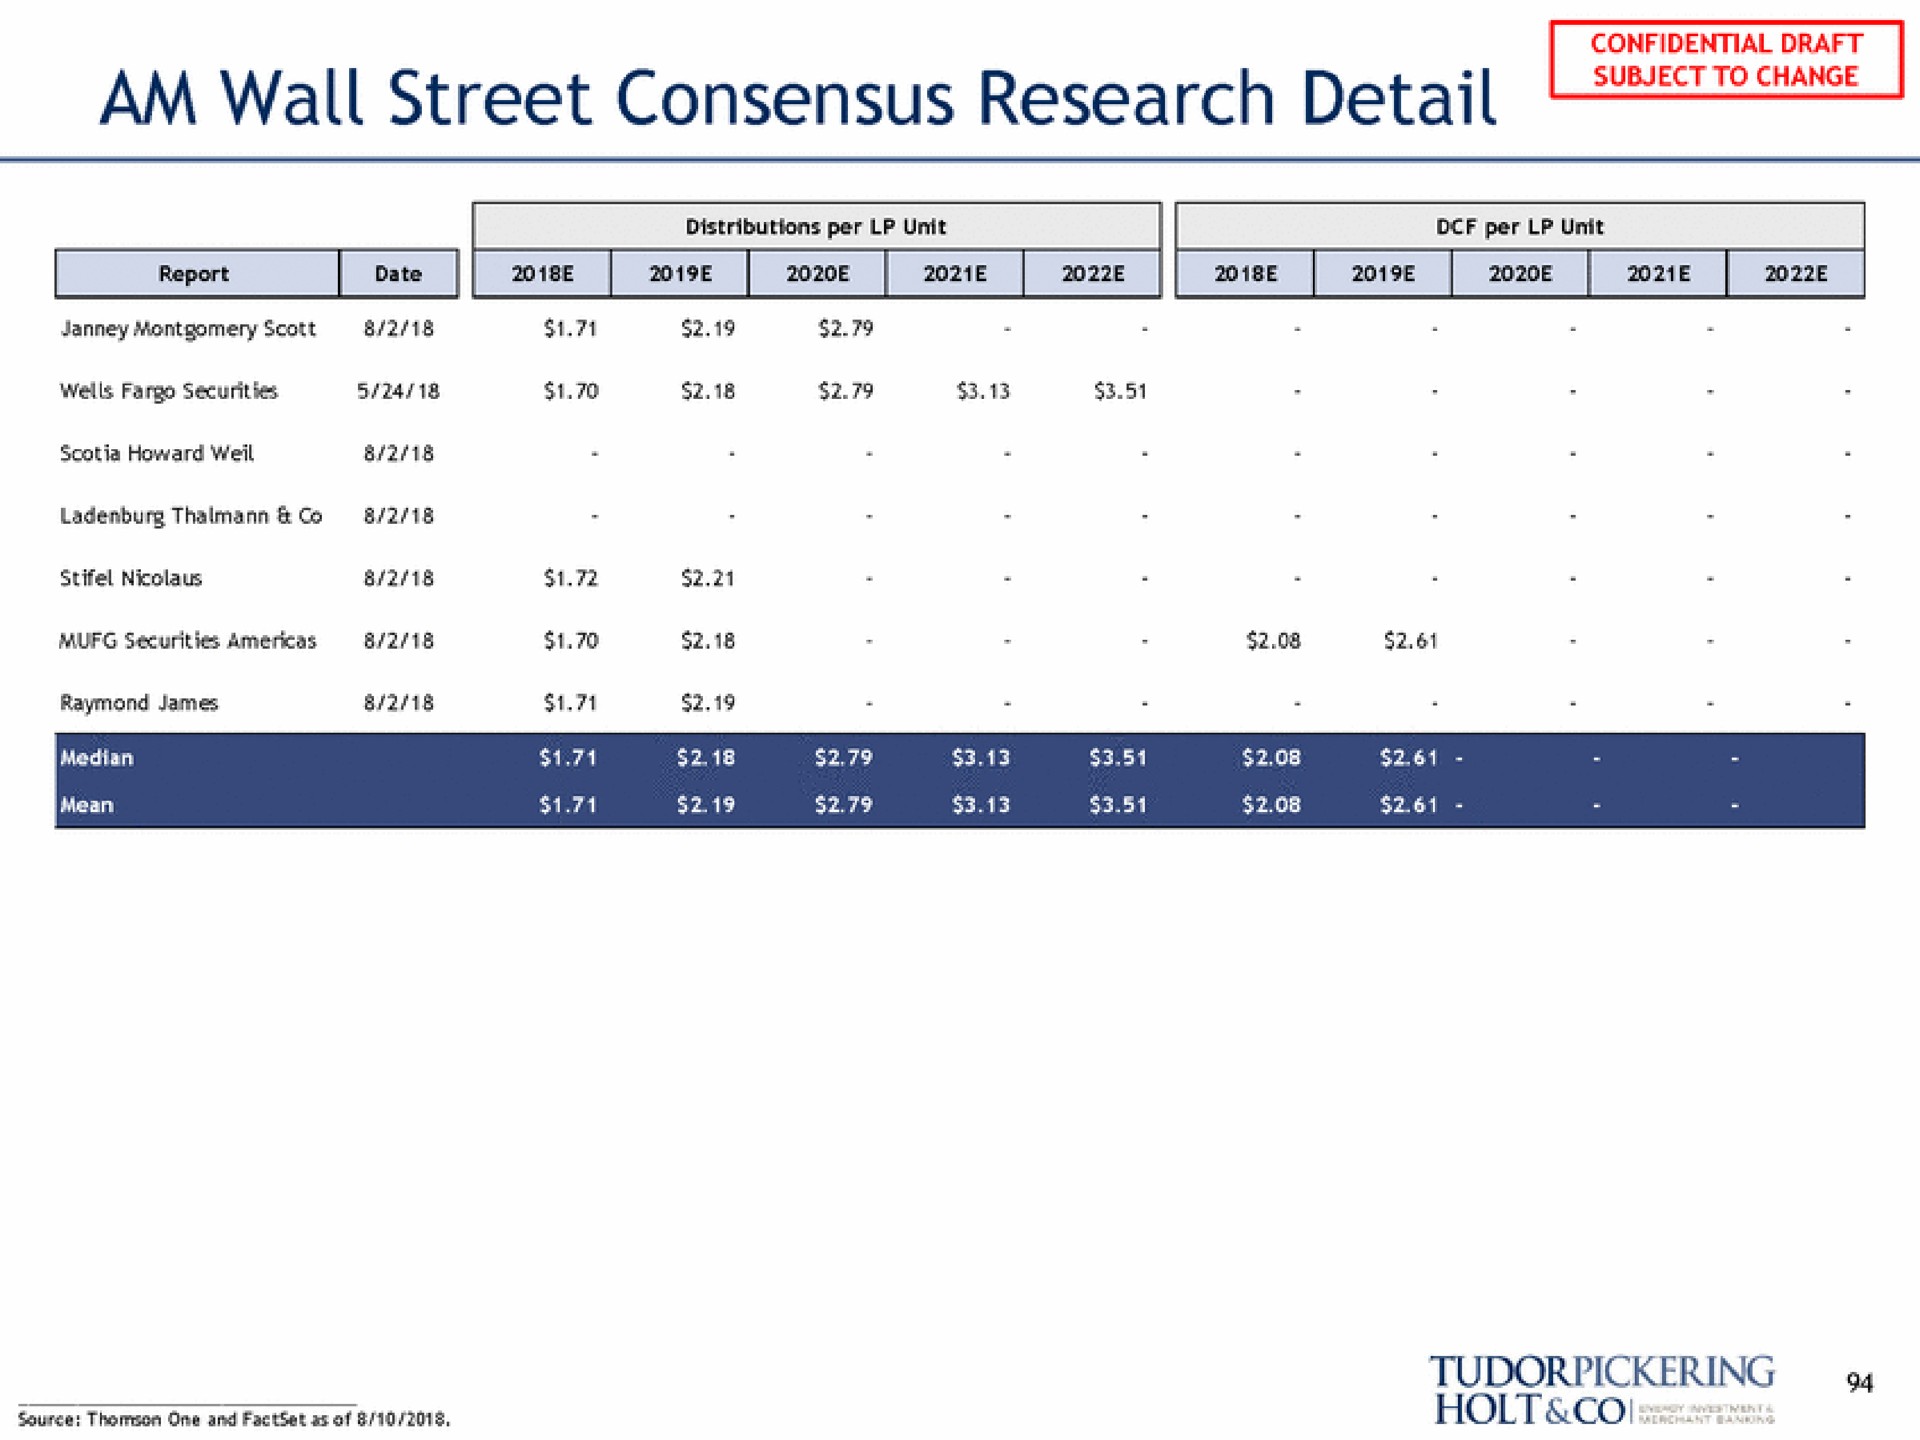 am wall street consensus research detail subject to change see | Tudor, Pickering, Holt & Co